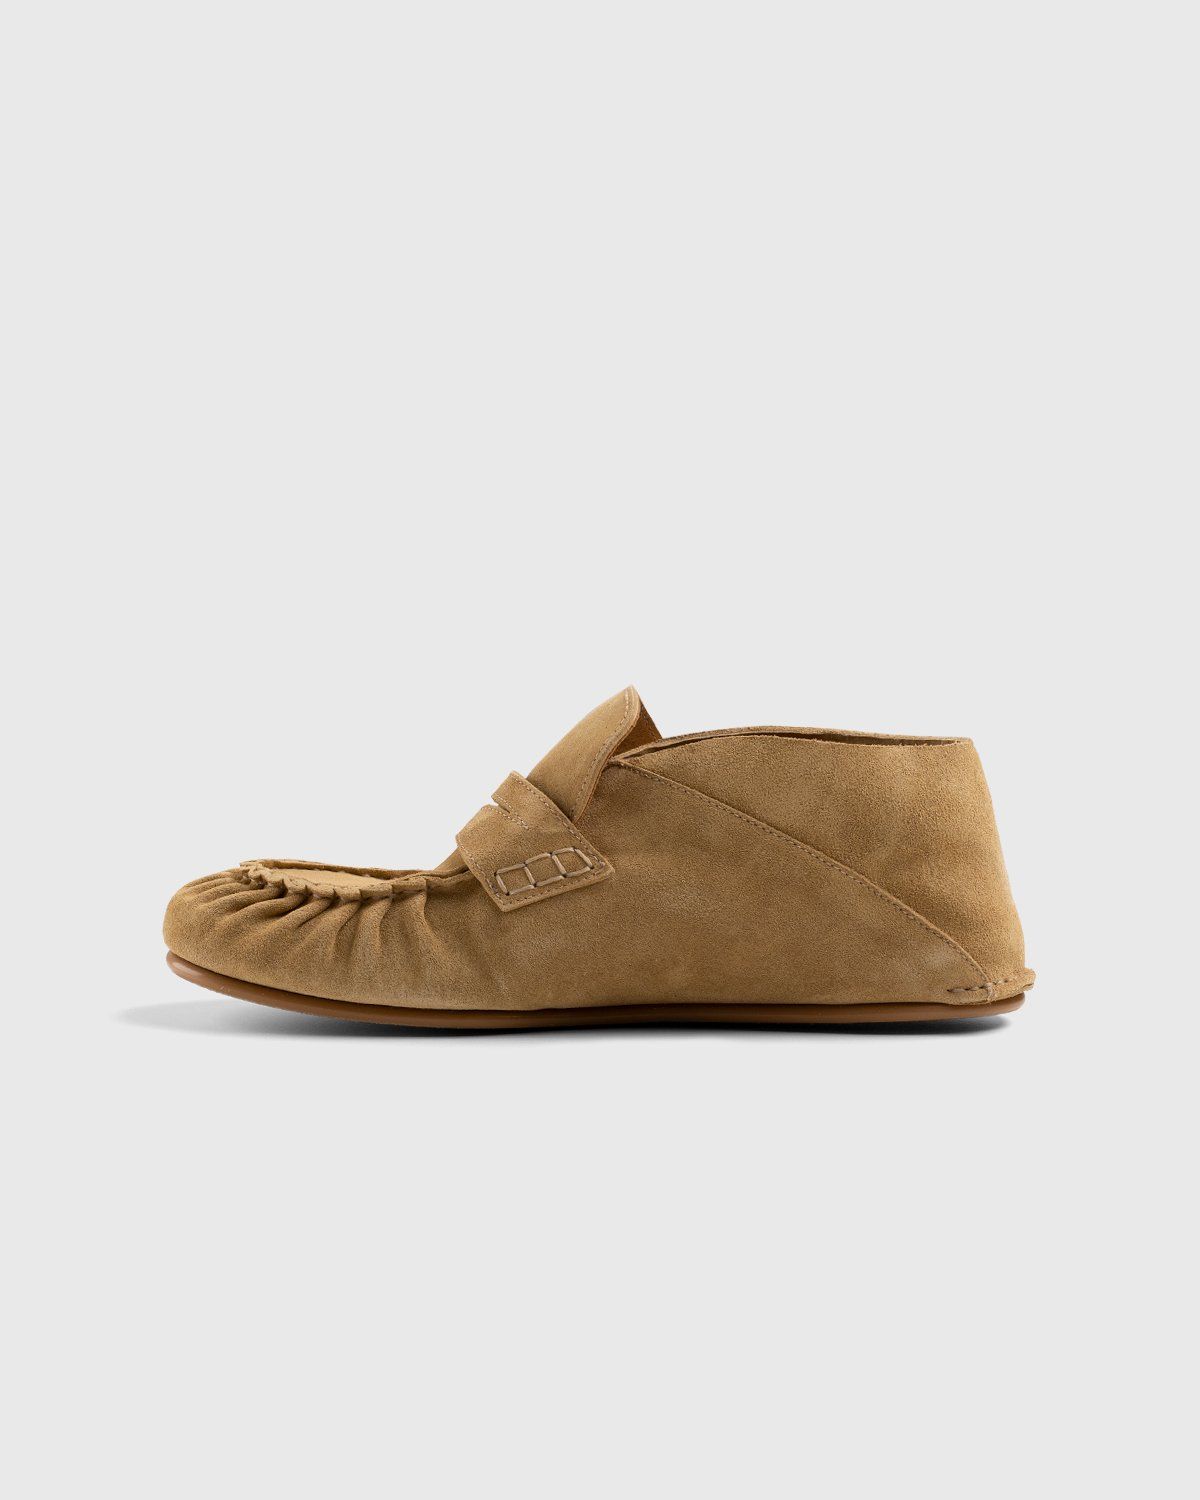 Loewe – Paula's Ibiza Suede Loafer Gold - Shoes - Brown - Image 2